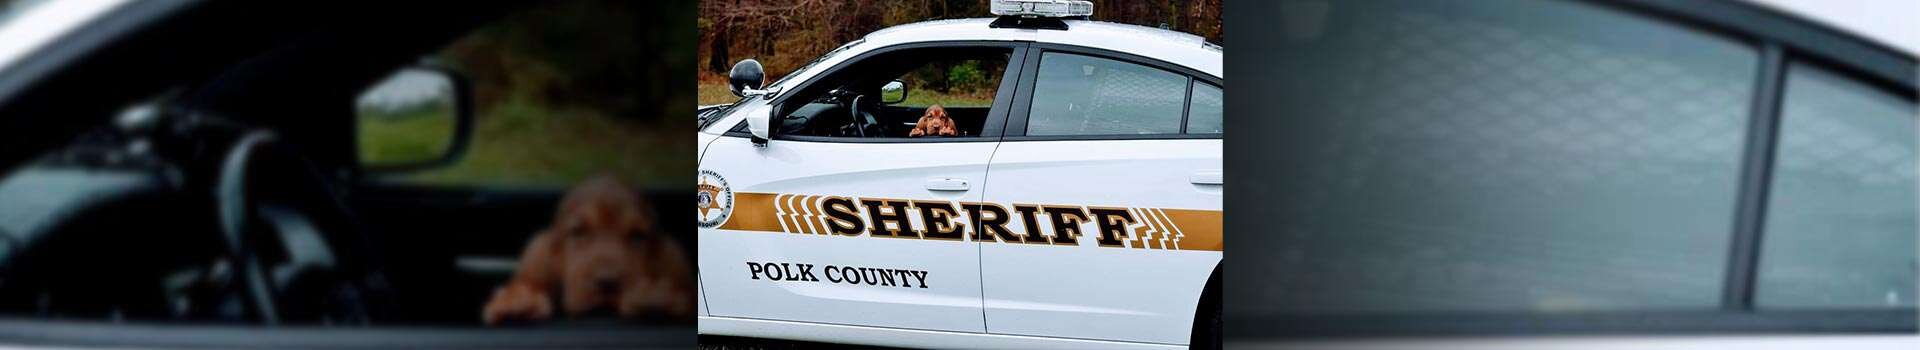 A brown puppy sitting in the drivers seat of a Polk County Sheriff vehicle.